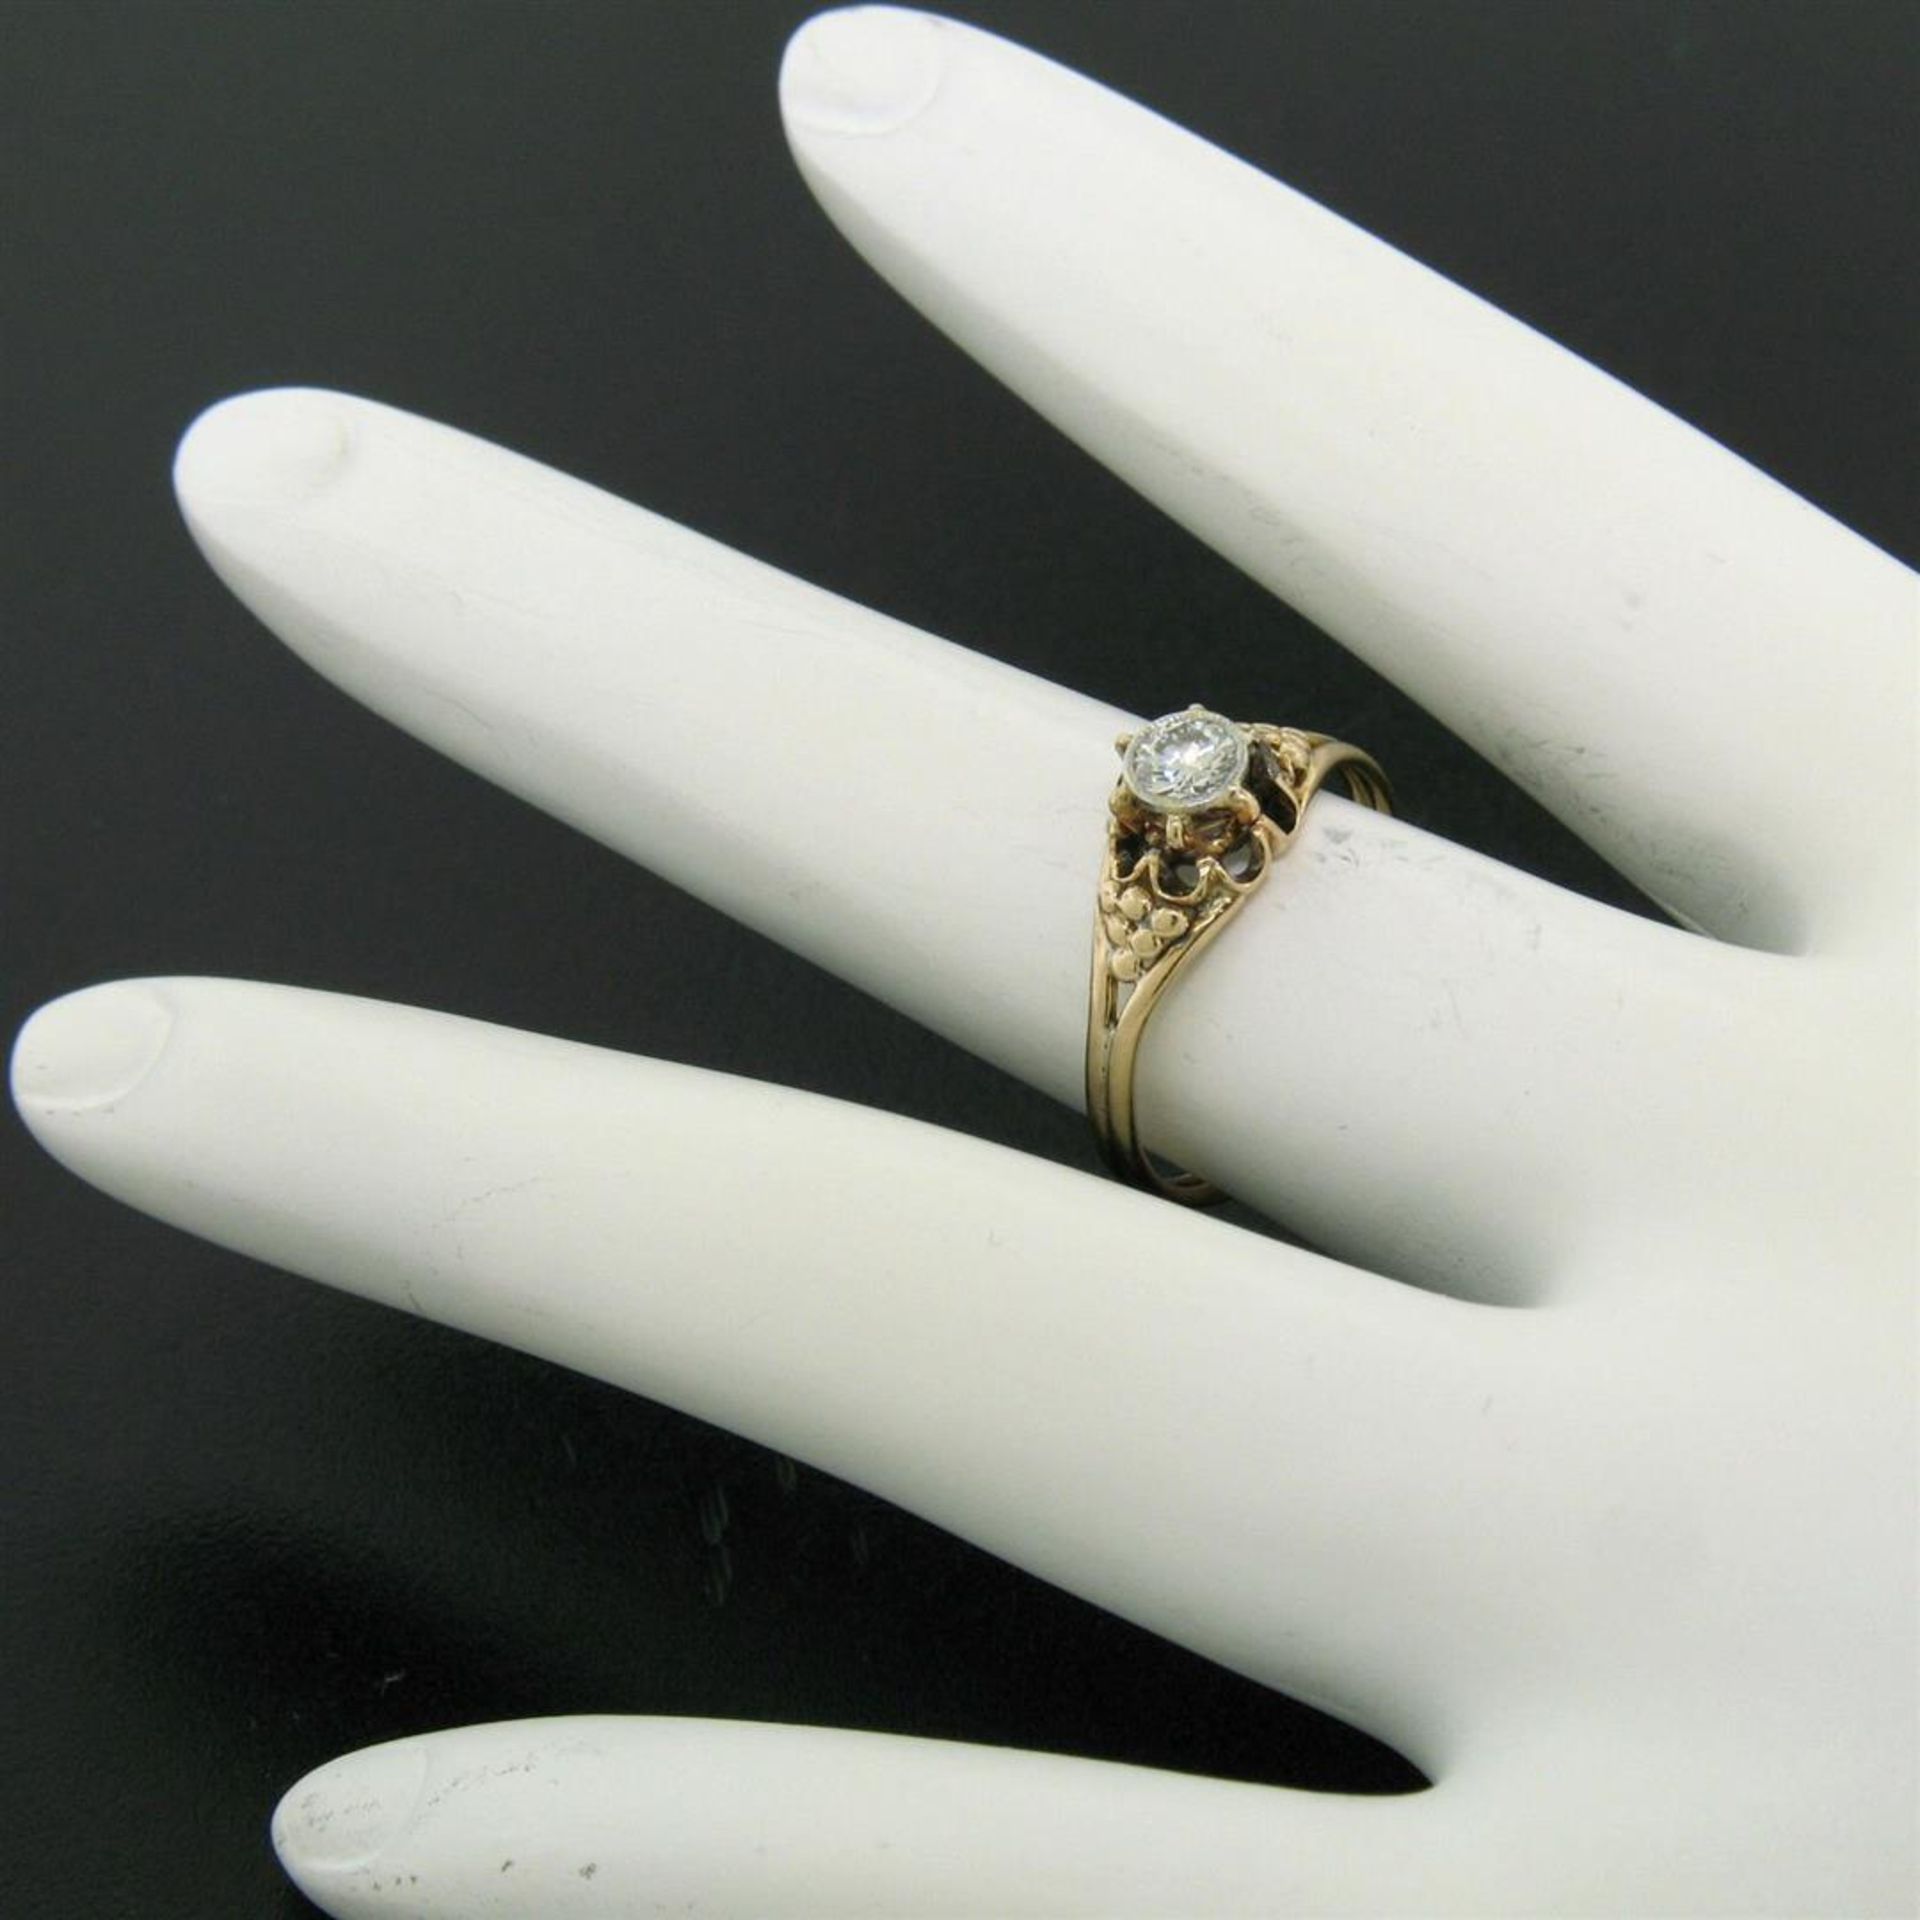 Antique 14kt Yellow and White Gold 0.30 ct Diamond Solitaire Ring - Image 7 of 8